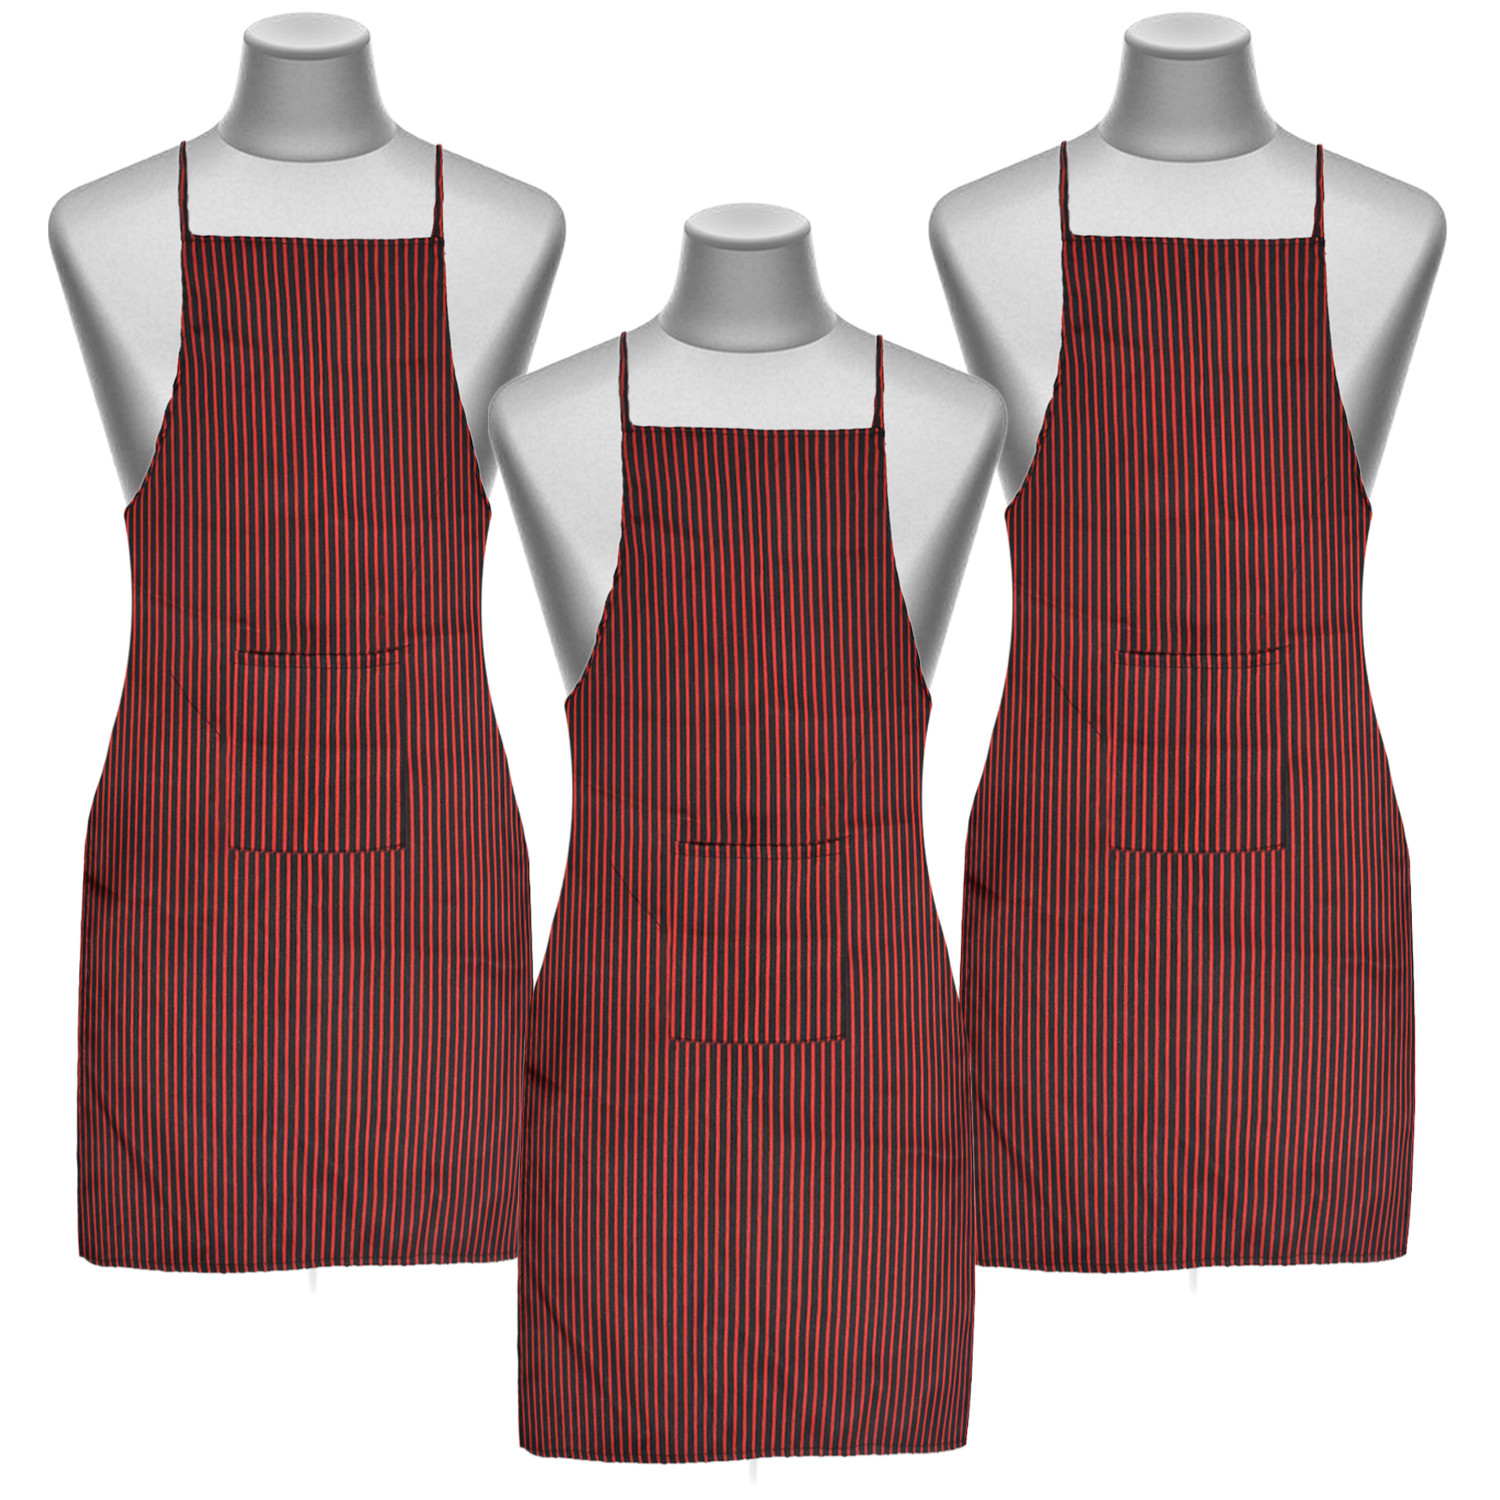 Kuber Industries Linning Printed Apron with 1 Front Pocket (Black & Maroon)